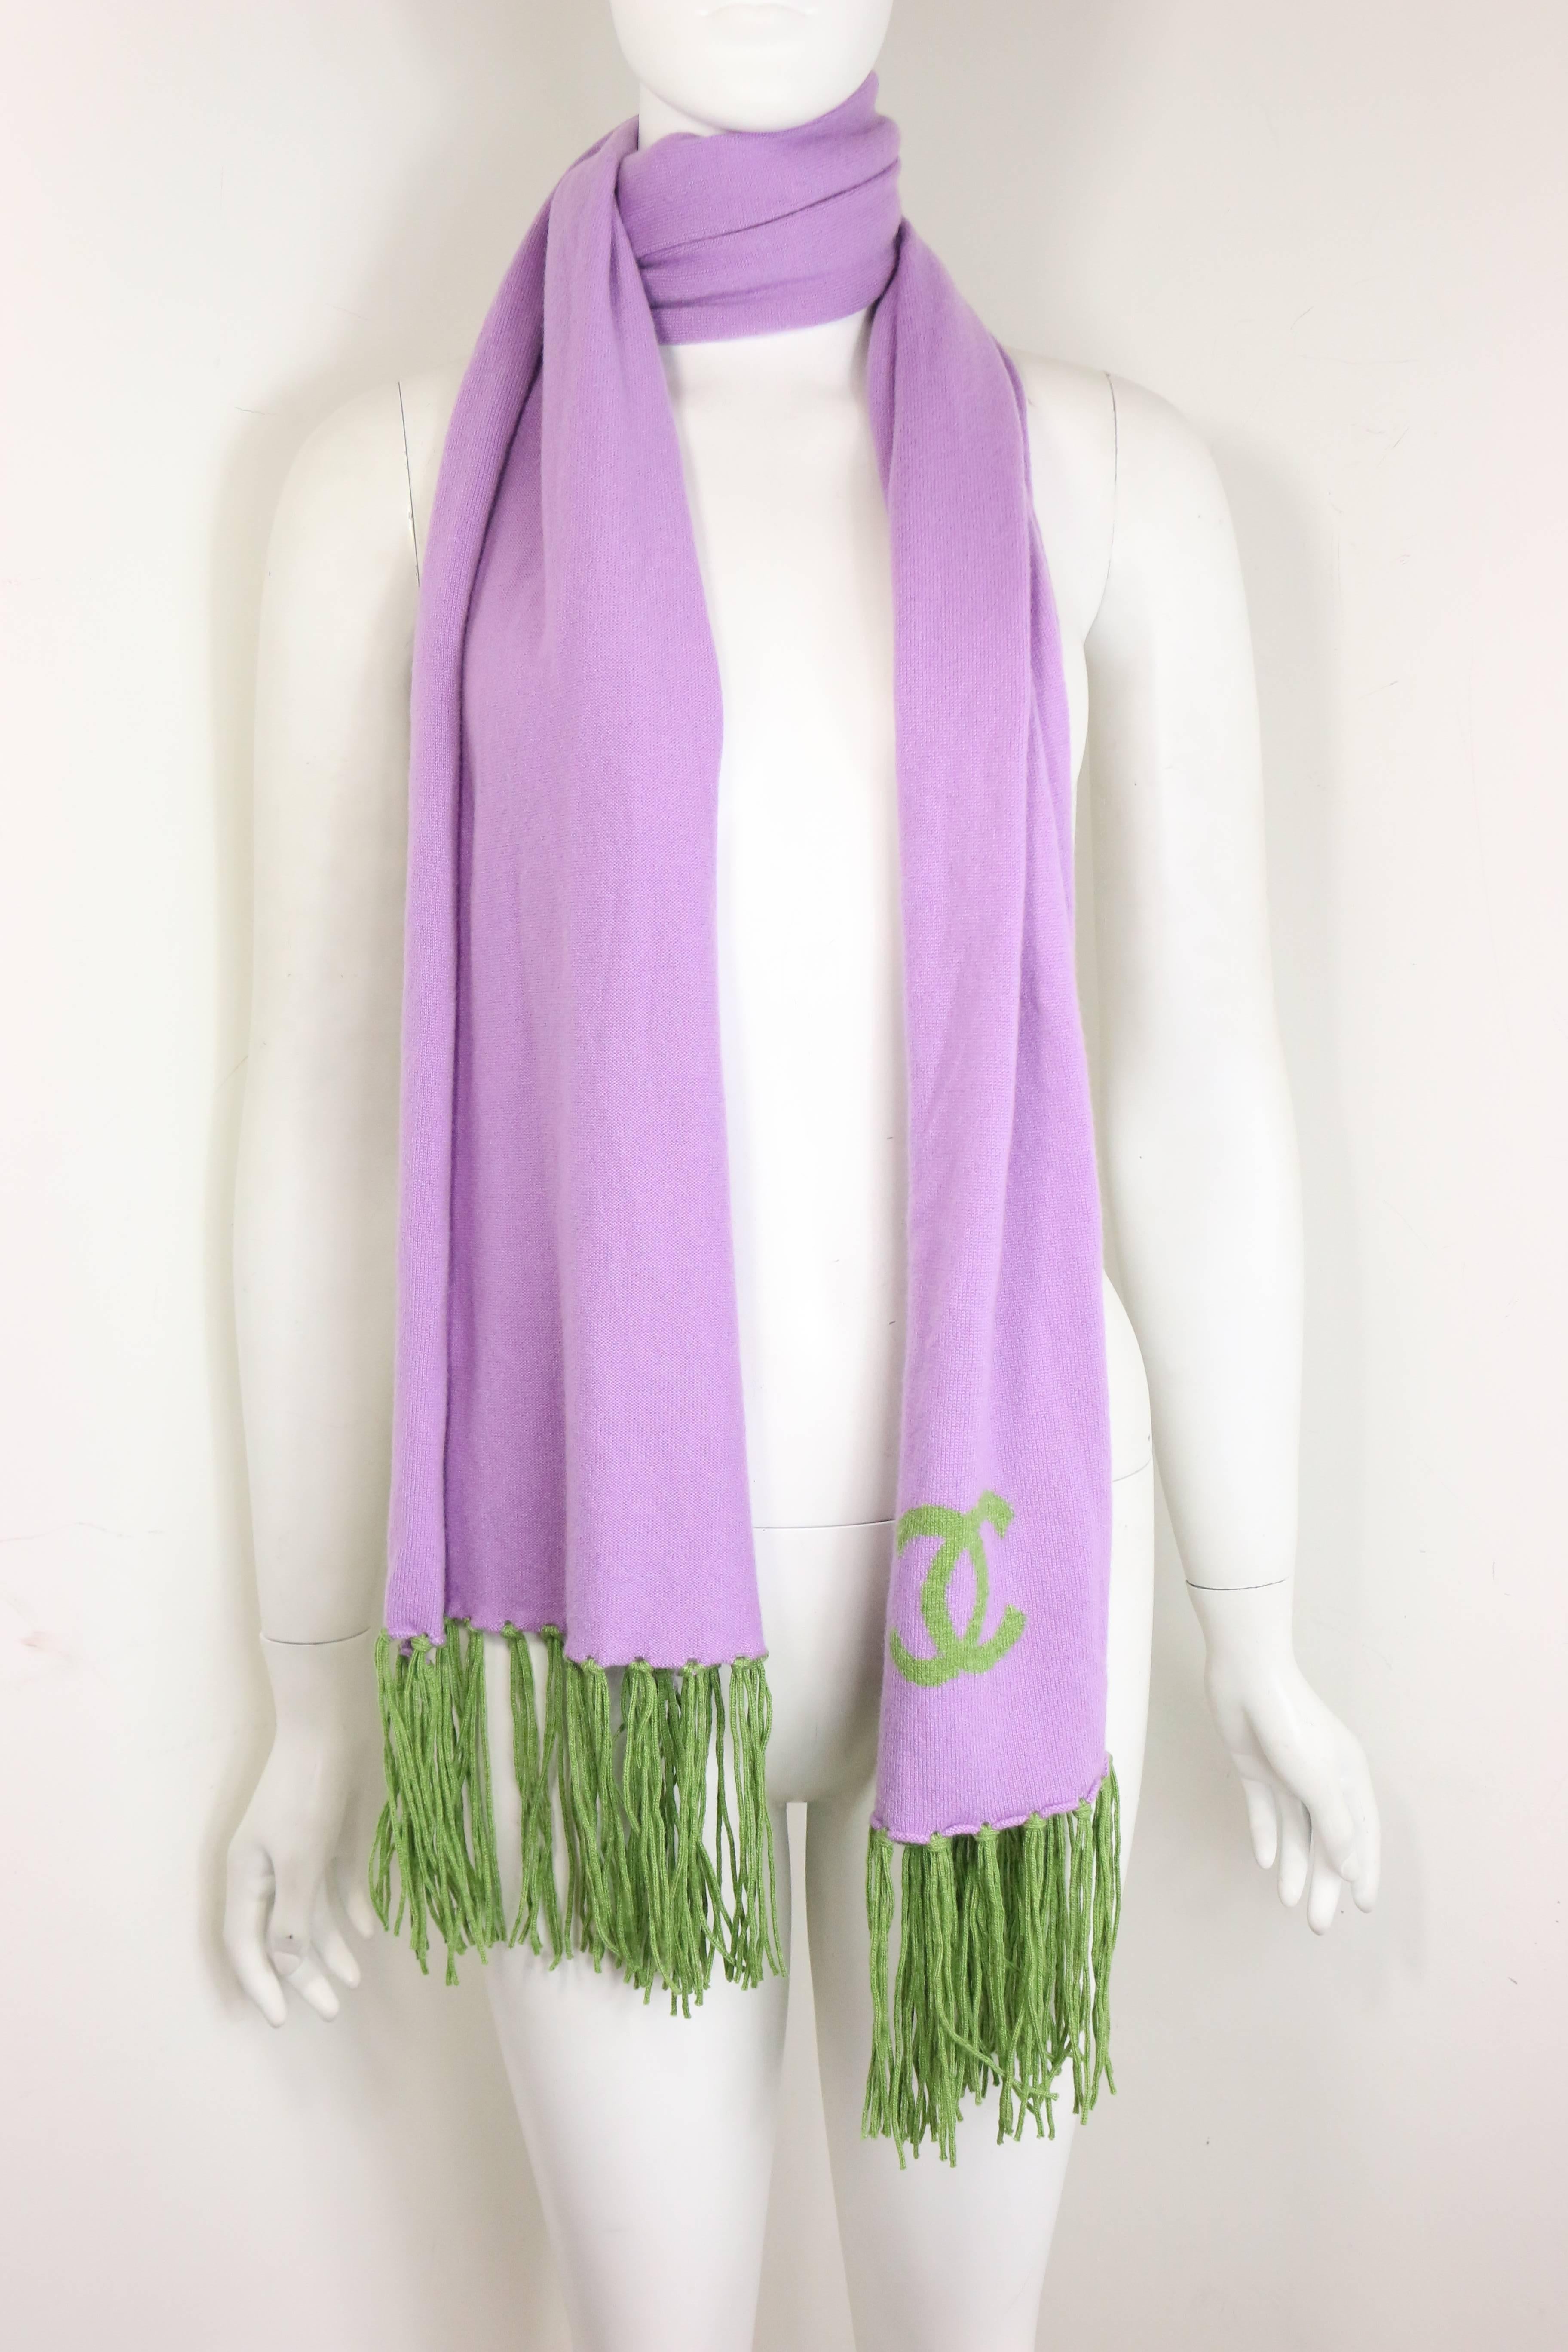 - Chanel purple cashmere scarf with green fringe from 2007 A/W collection. Featuring a green "CC" logo on the scarf. Excellent quality and colourful scarf for winter. 

- Made in France. 

- One Size. 

- Length: 70 inches. Width: 15